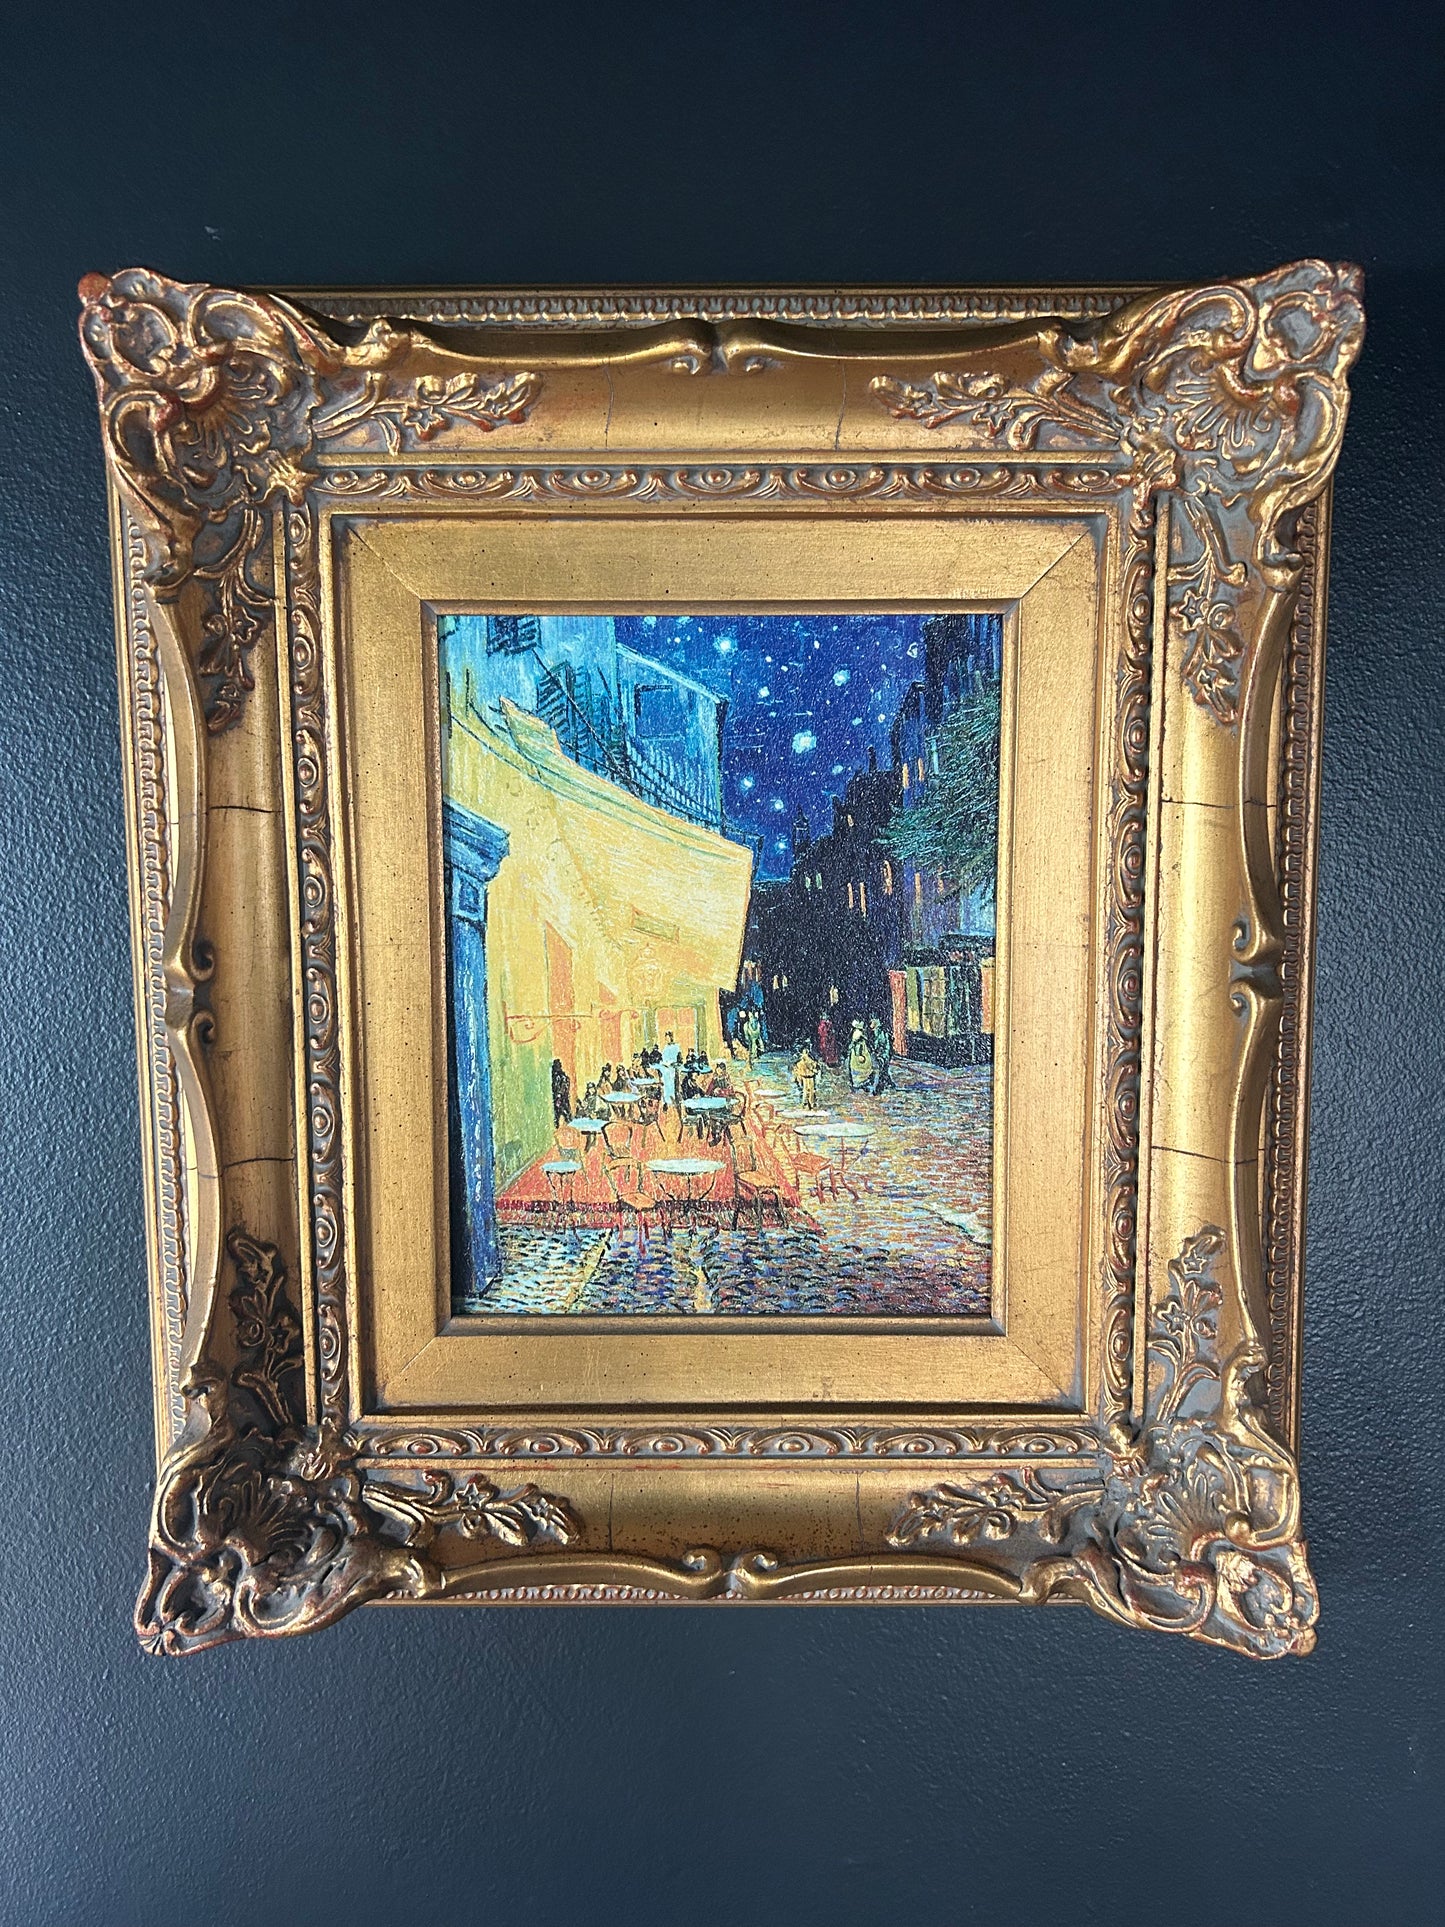 Van Gogh 'Cafe Terrace at Night' reproduction with gilded frame